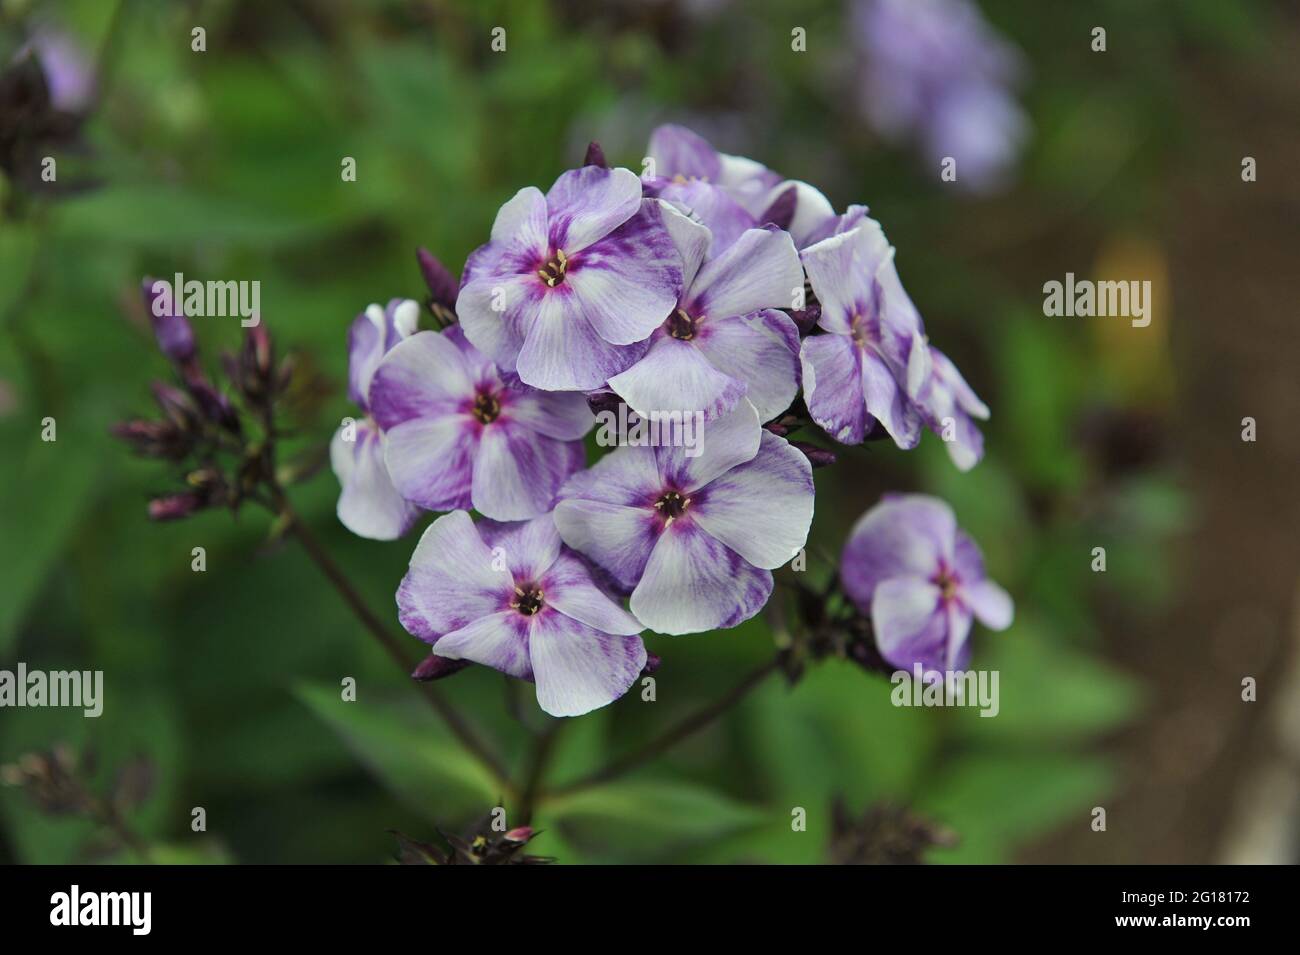 Violet-blue phlox paniculata Alexandr Voin blooms in a garden in July Stock Photo